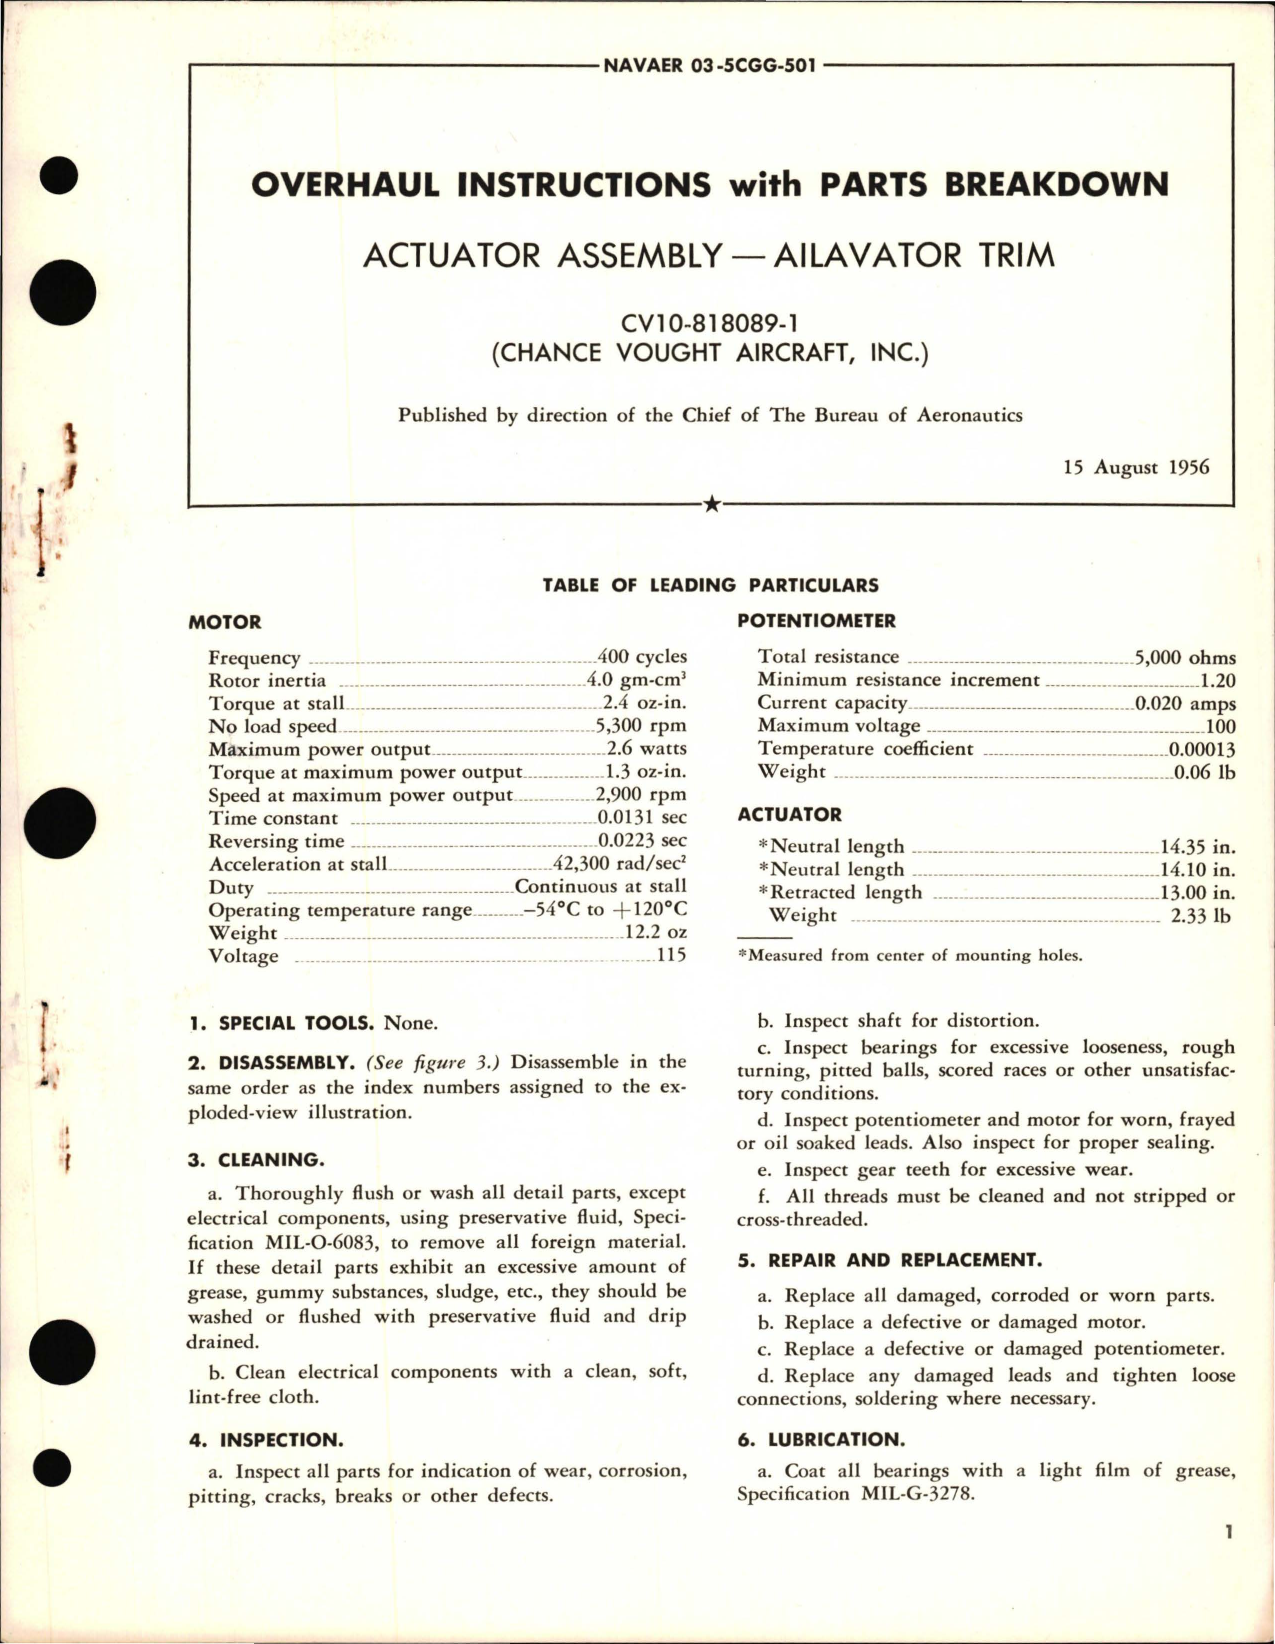 Sample page 1 from AirCorps Library document: Overhaul Instructions with Parts Breakdown for Actuator Assembly - Ailavator Trim - CV10-818089-1 